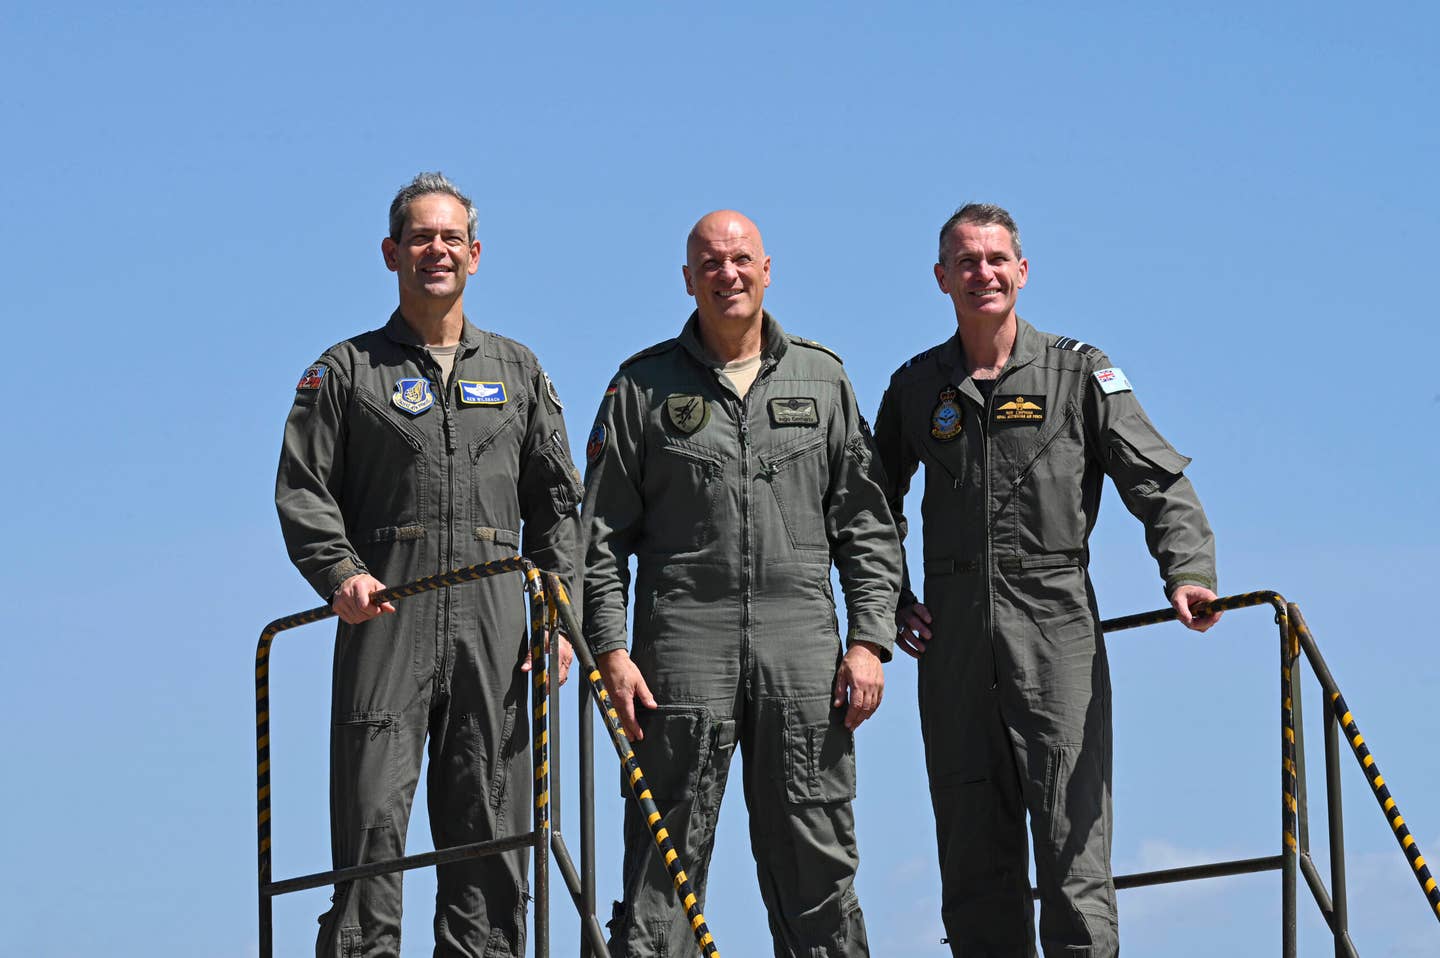 U.S. Air Force Gen. Ken Wilsbach, left, Pacific Air Forces commander, poses for a photo with German Air Force Lt. Gen. Ingo Gerhartz, middle, Chief of Air Force, and Royal Australian Air Force Air Marshal Robert Chipman, right, Chief of Air Force, at RAAF Base Darwin, Australia, in September 2022. <em>U.S. Air Force photo by Staff Sgt. Savannah L. Waters</em>